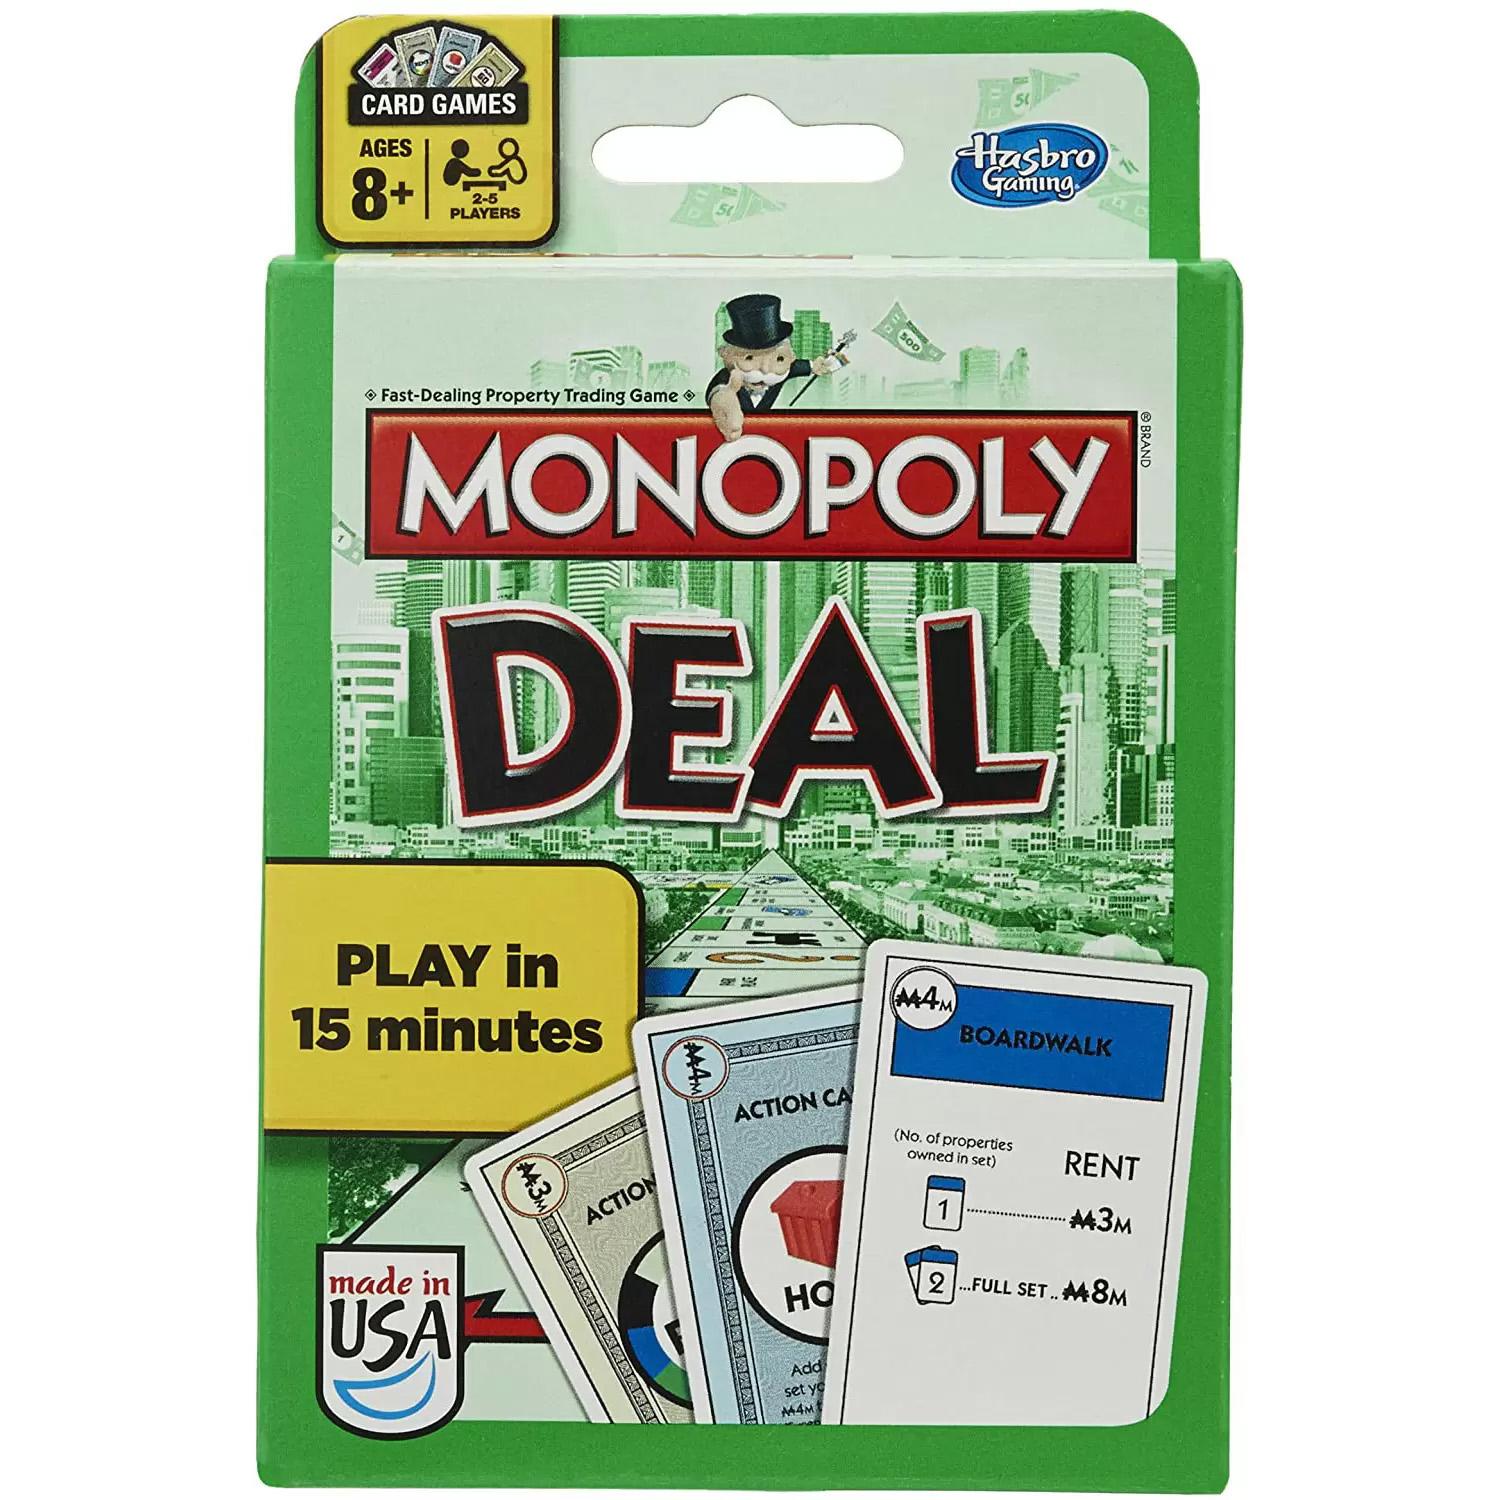 Monopoly Deal Card Game for $5.49